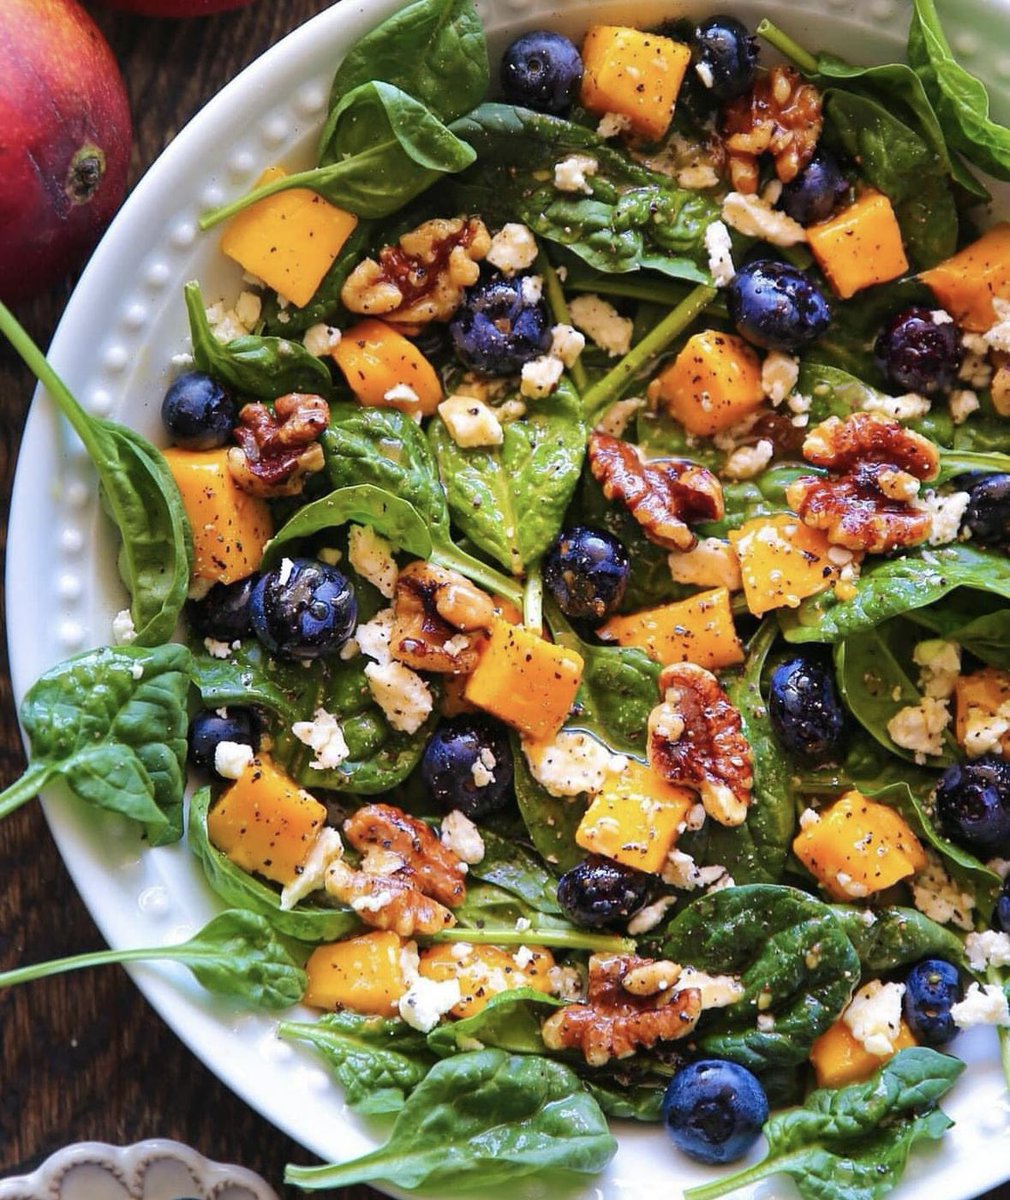 Mango 🥭 and Spinach Salad 🥗 with
Blueberries 🫐, Walnuts, Feta Cheese 🫕, and Lemon 🍋 Honey 🍯 Mustard Dressing.